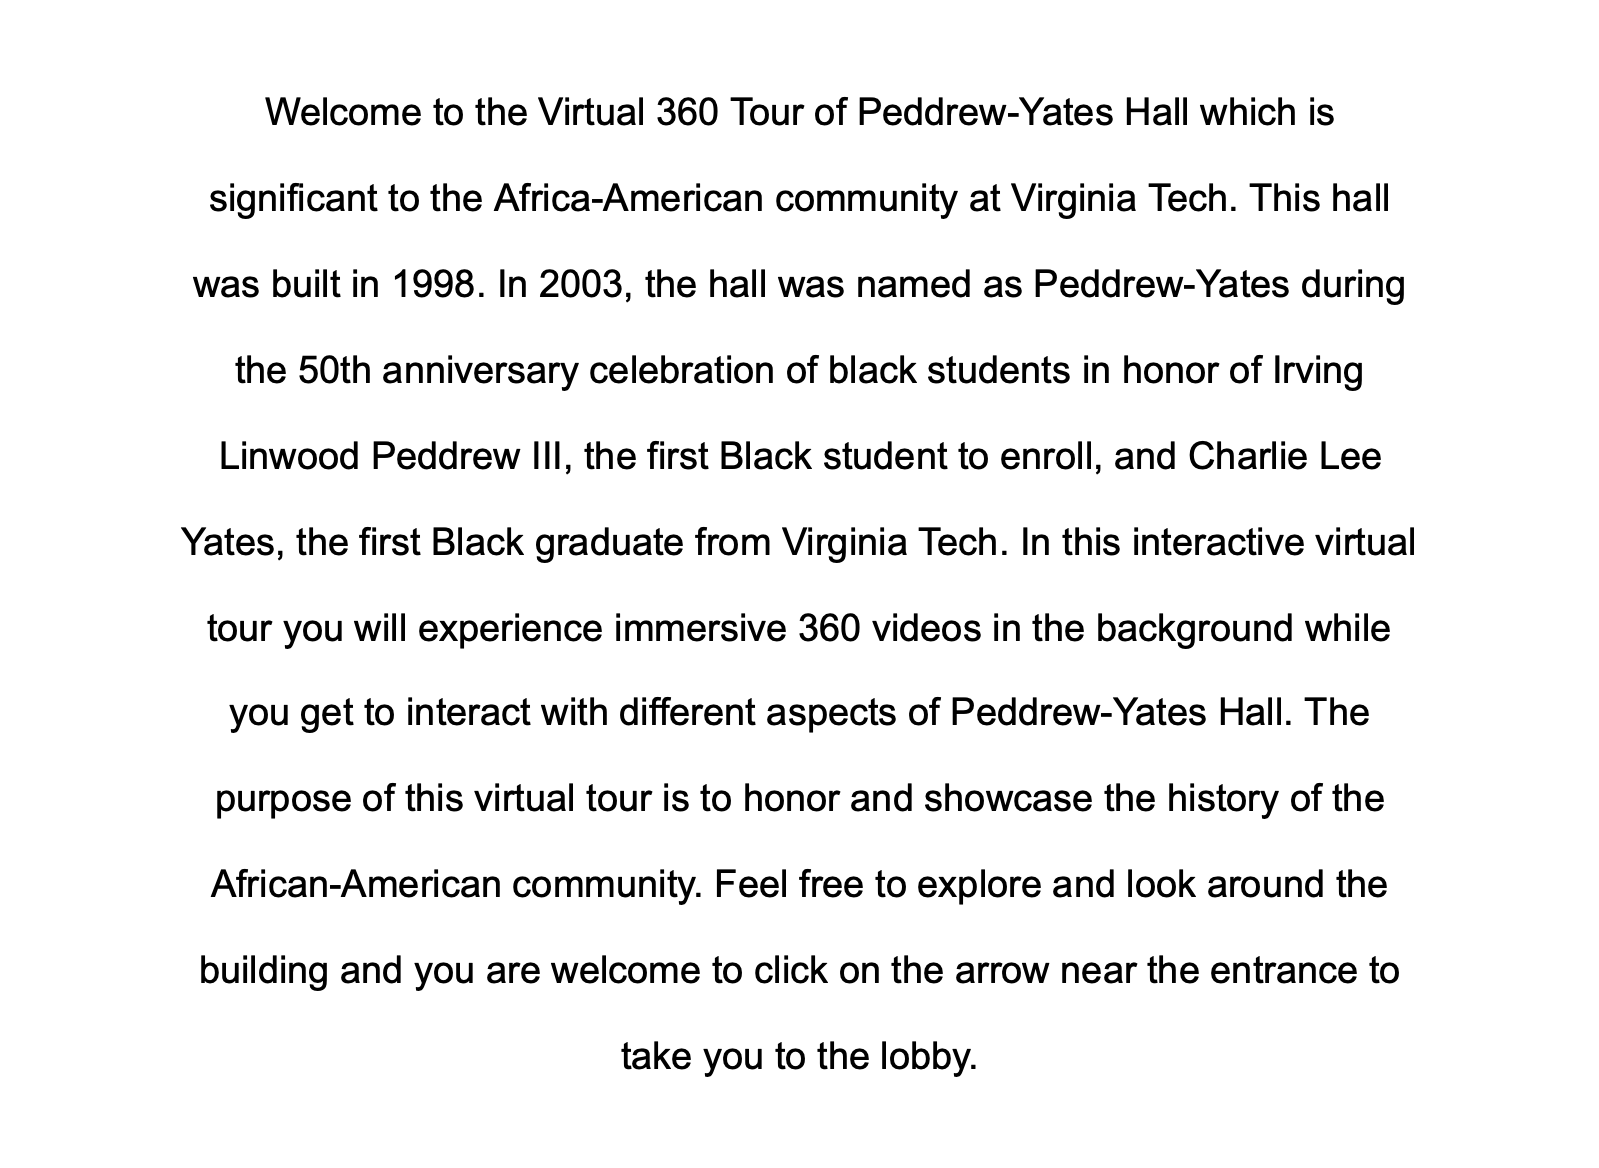 Welcome to the Virtual 360 Tour of Peddrew-Yates Hall which is significant to the Africa-American community at Virginia Tech. 
                 This hall was built in 1998. In 2003, the hall was named as Peddrew-Yates during the 50th anniversary celebration of black students in honor of Irving Linwood Peddrew III, the first Black student to enroll, and Charlie Lee Yates, the first Black graduate from Virginia Tech. 
                 In this interactive virtual tour you will experience immersive 360 videos in the background while you get to interact with different aspects of Peddrew-Yates Hall. 
                 The purpose of this virtual tour is to honor and showcase the history of the African-American community. 
                 Feel free to explore and look around the building and you are welcome to click on the arrow near the entrance to take you to the lobby.